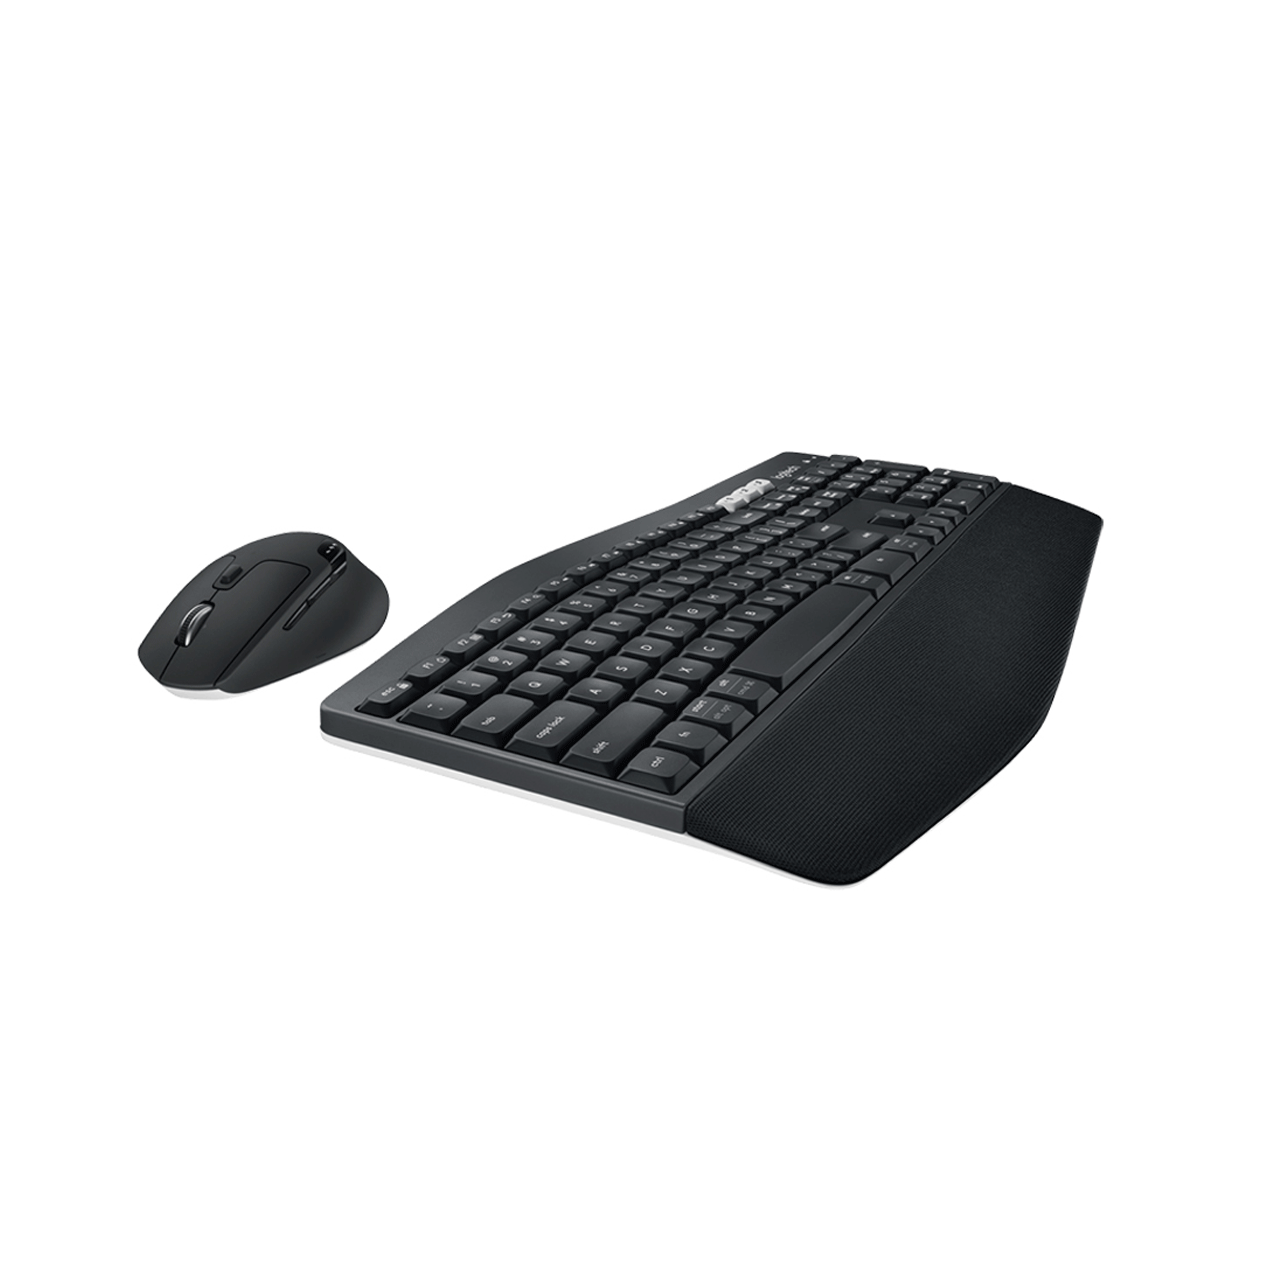 MK850---Wireless-Keyboard-and-Mouse